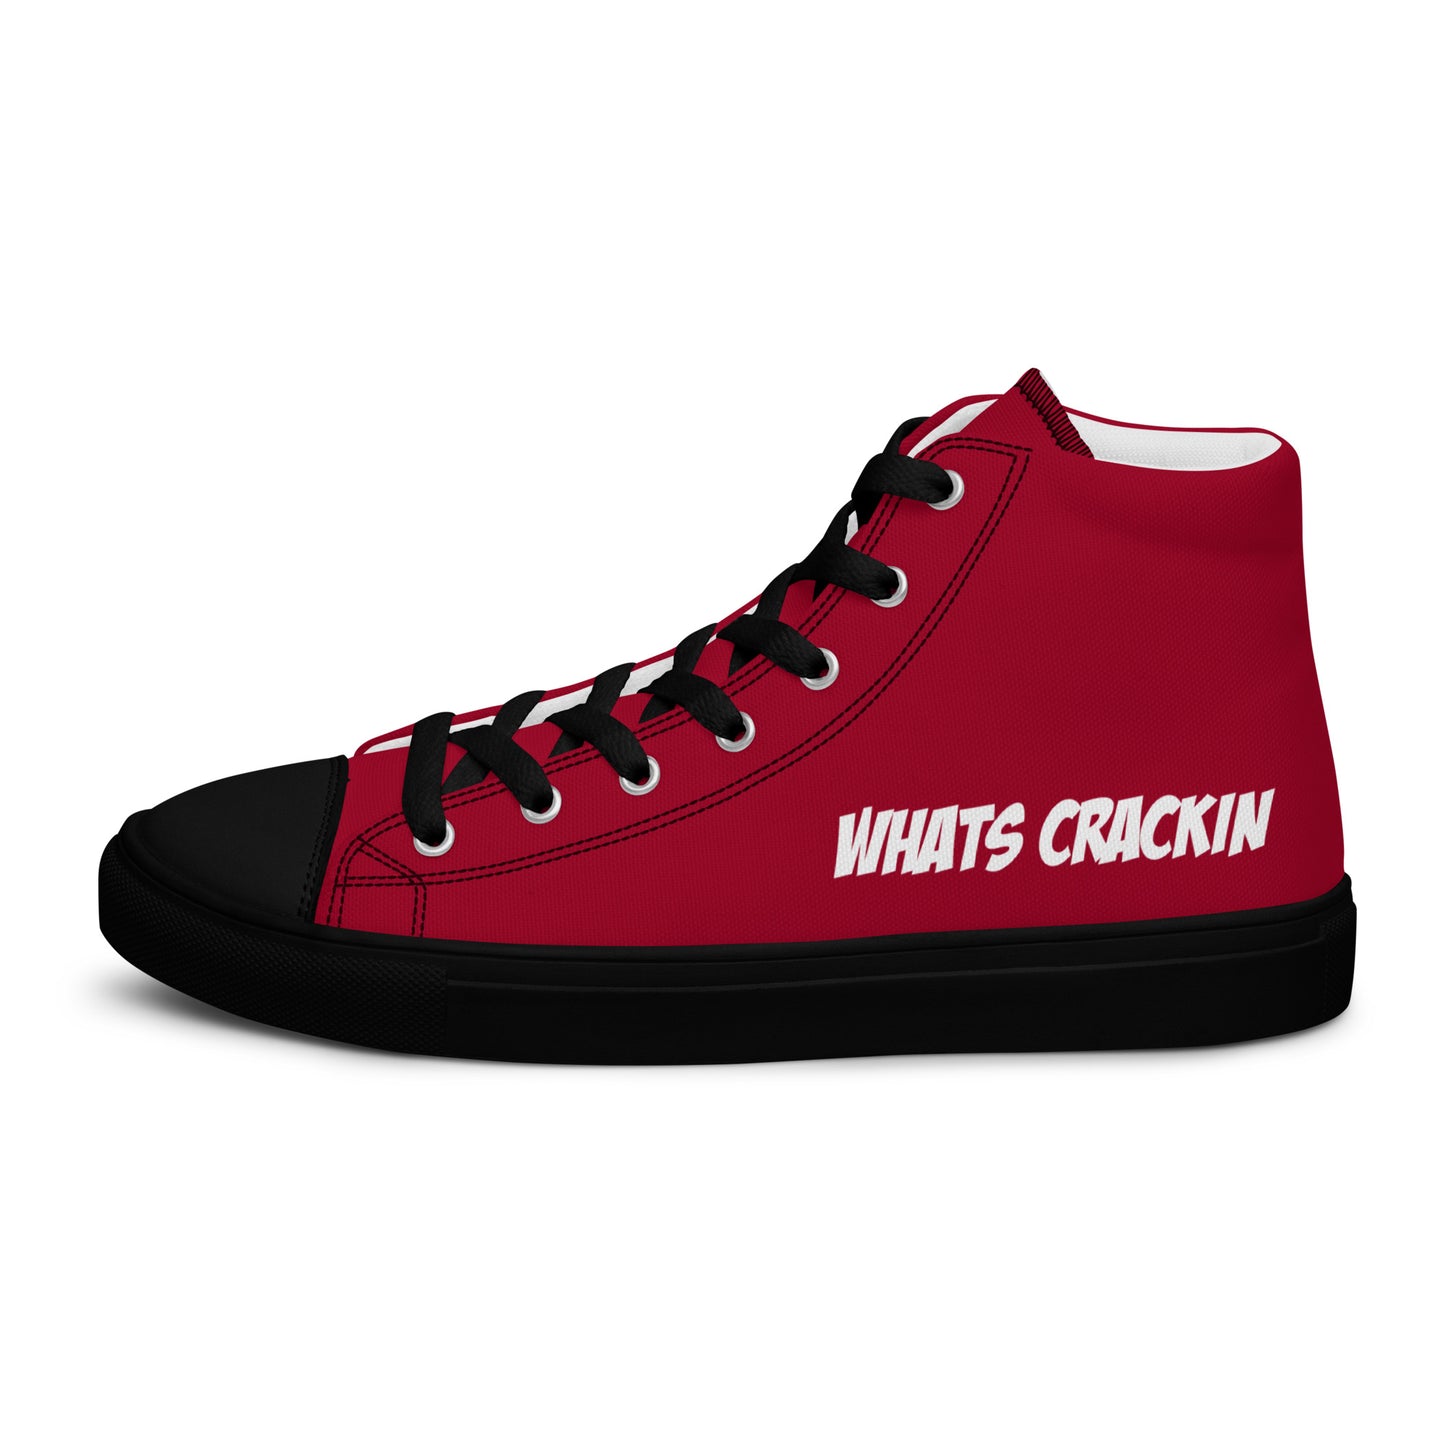 WC high top canvas shoes